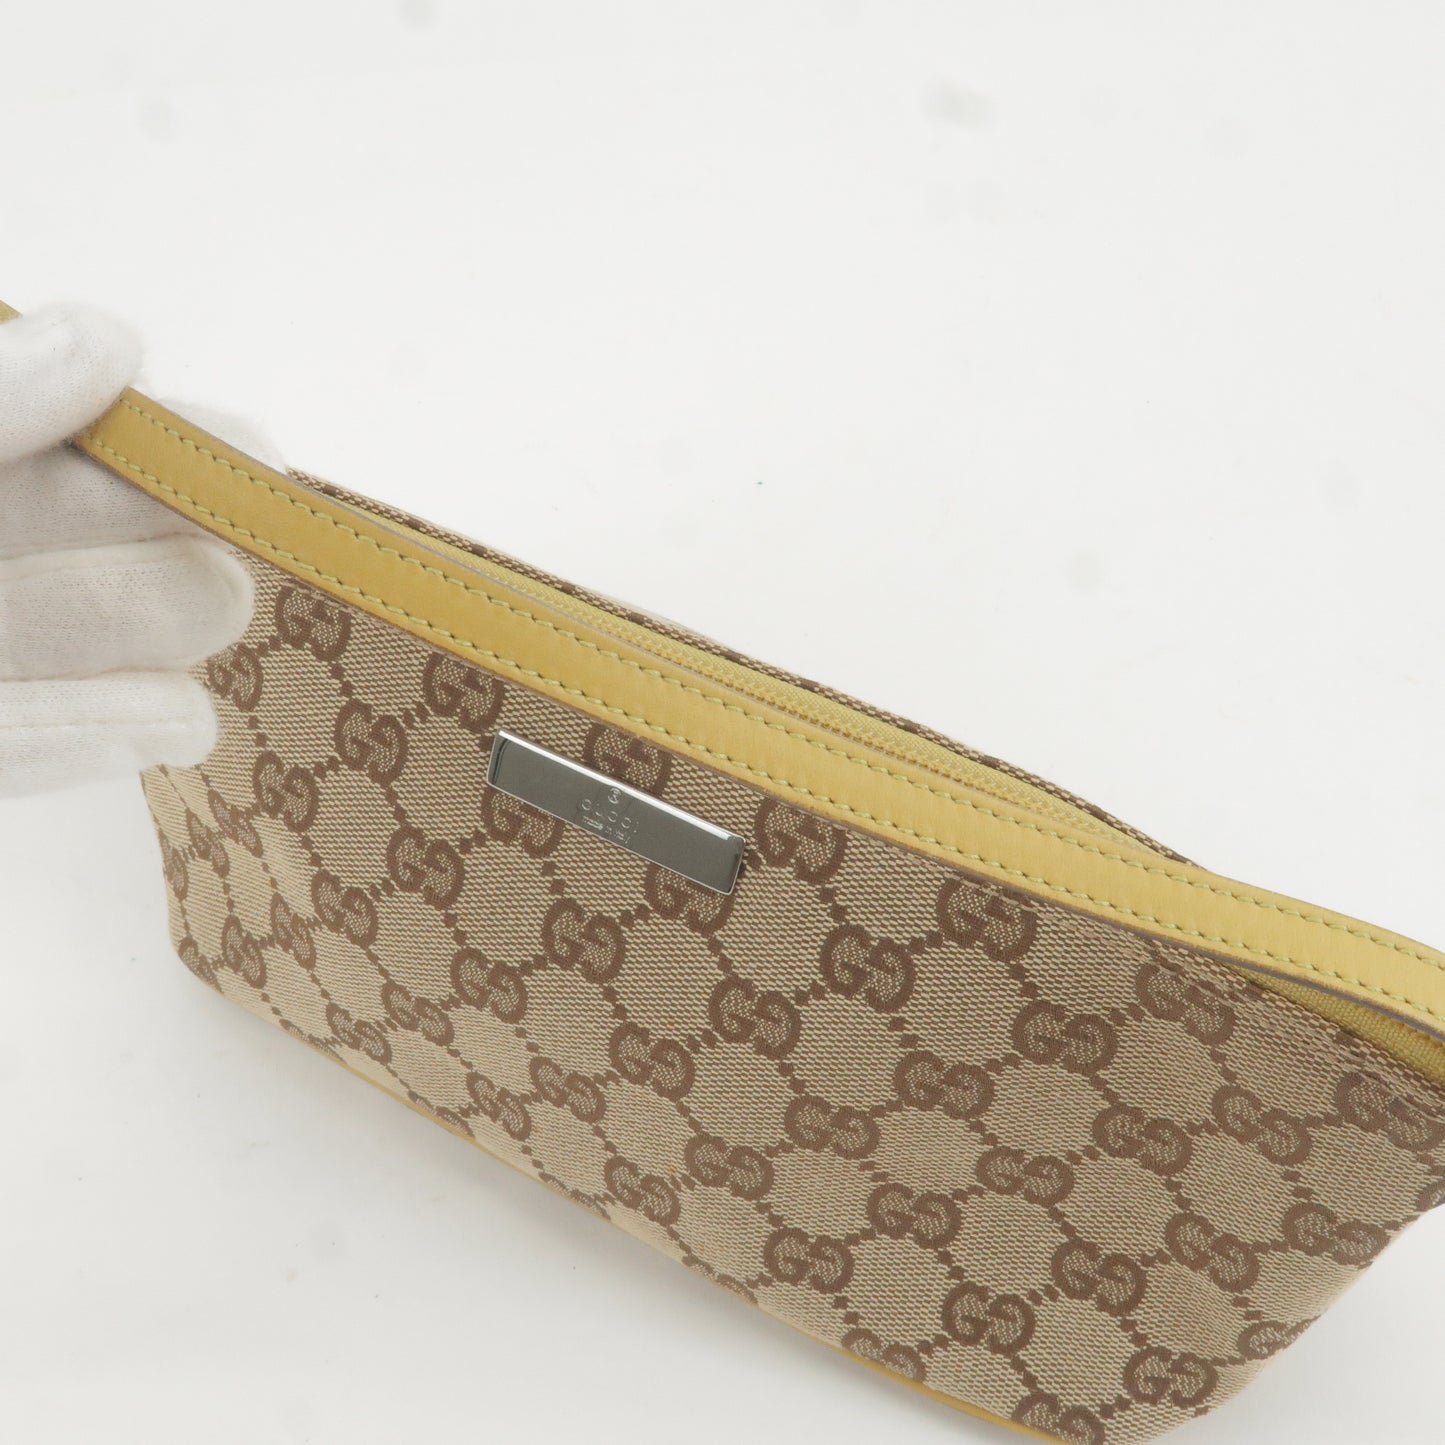 GUCCI GG Canvas Leather Pouch Boat Bag Brown Yellow 07198